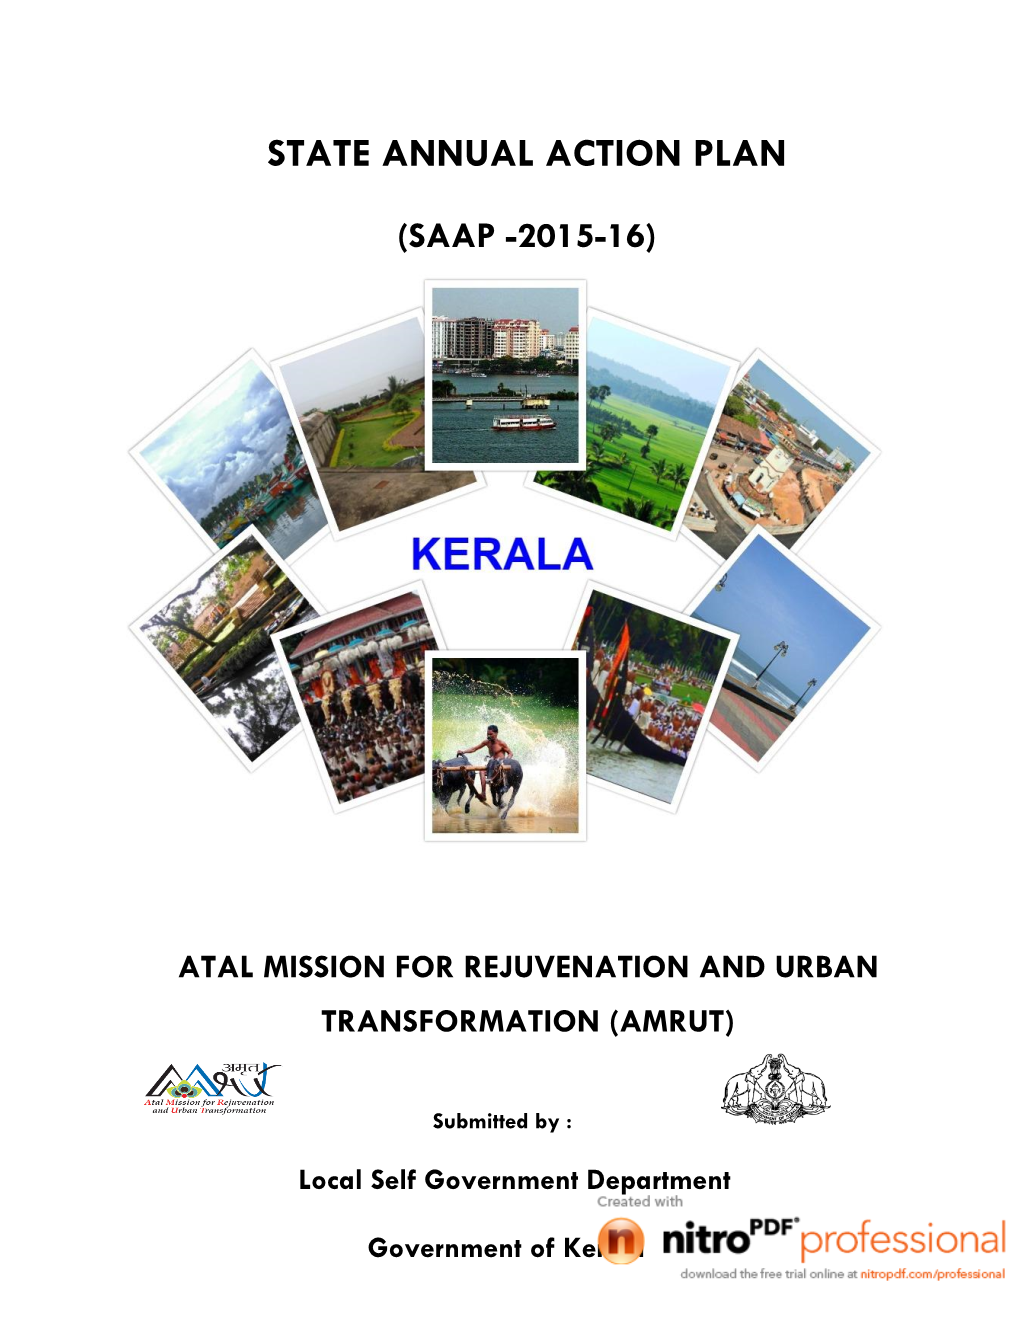 STATE ANNUAL ACTION PLAN (SAAP) for Kerala